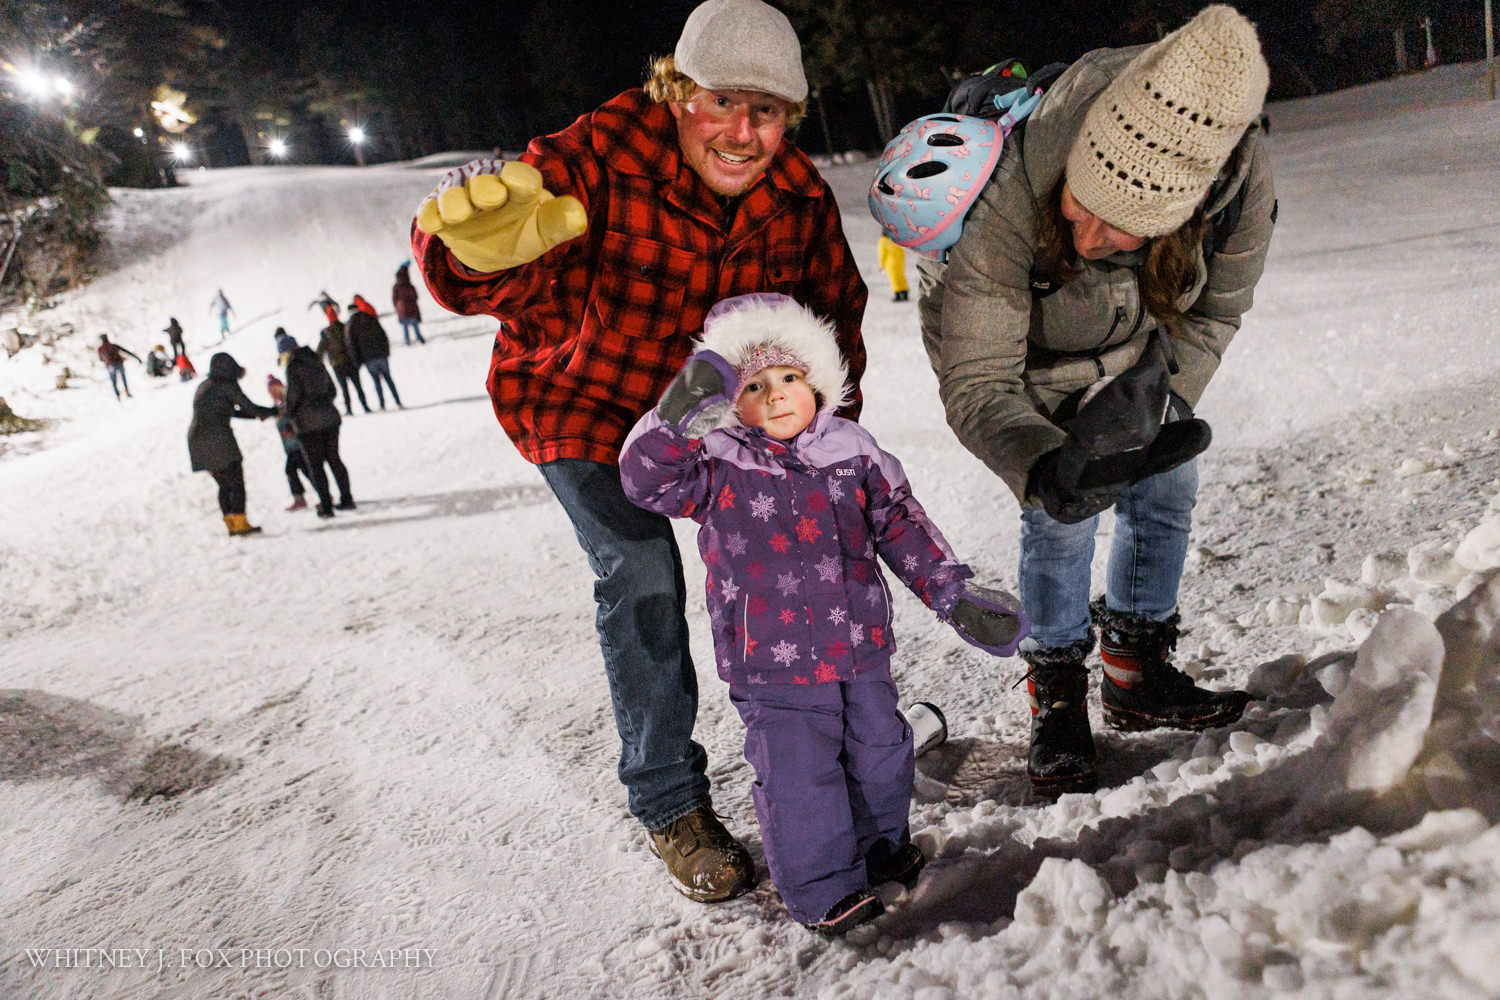 449 winter kids welcome to winter 2022 lost valley auburn maine documentary event photographer whitney j fox 3547 w